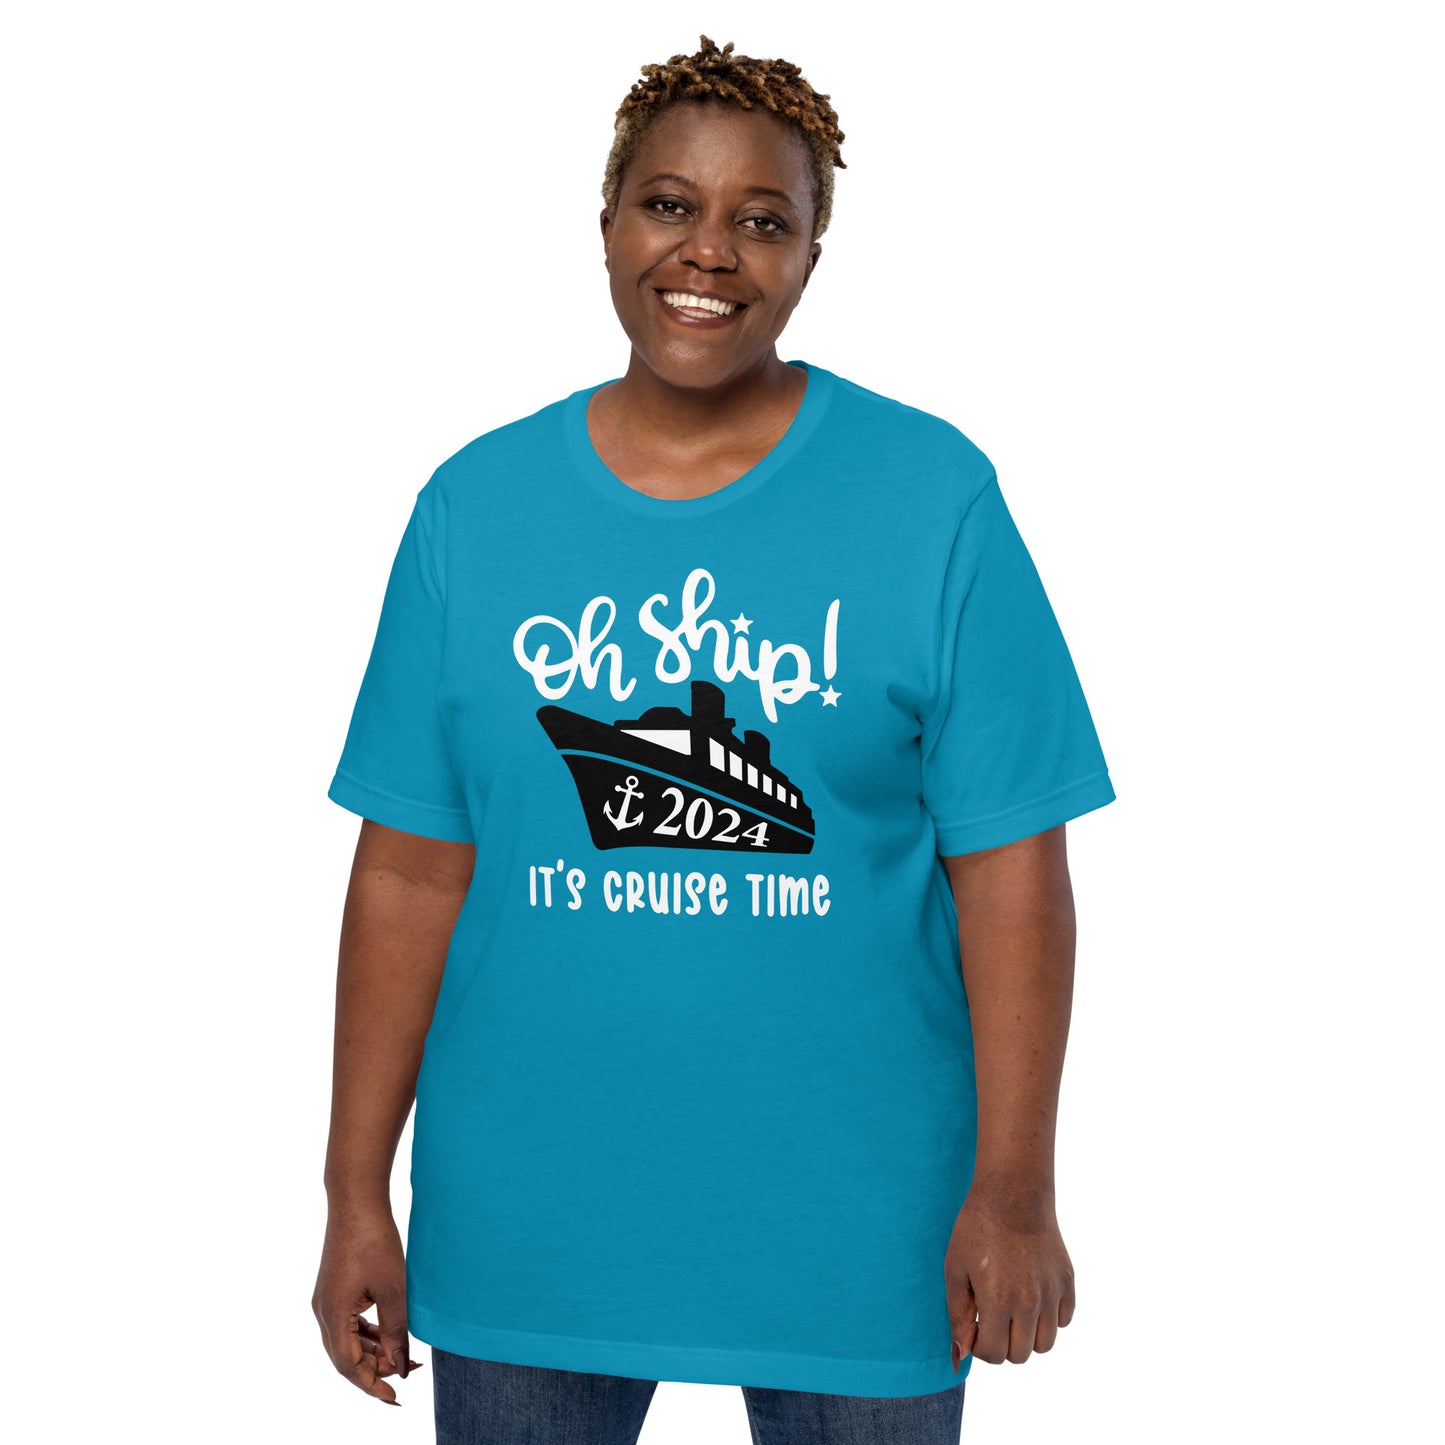 Oh Ship! It's Cruise Time 2024 Unisex T-Shirt Designed by Dog Artistry